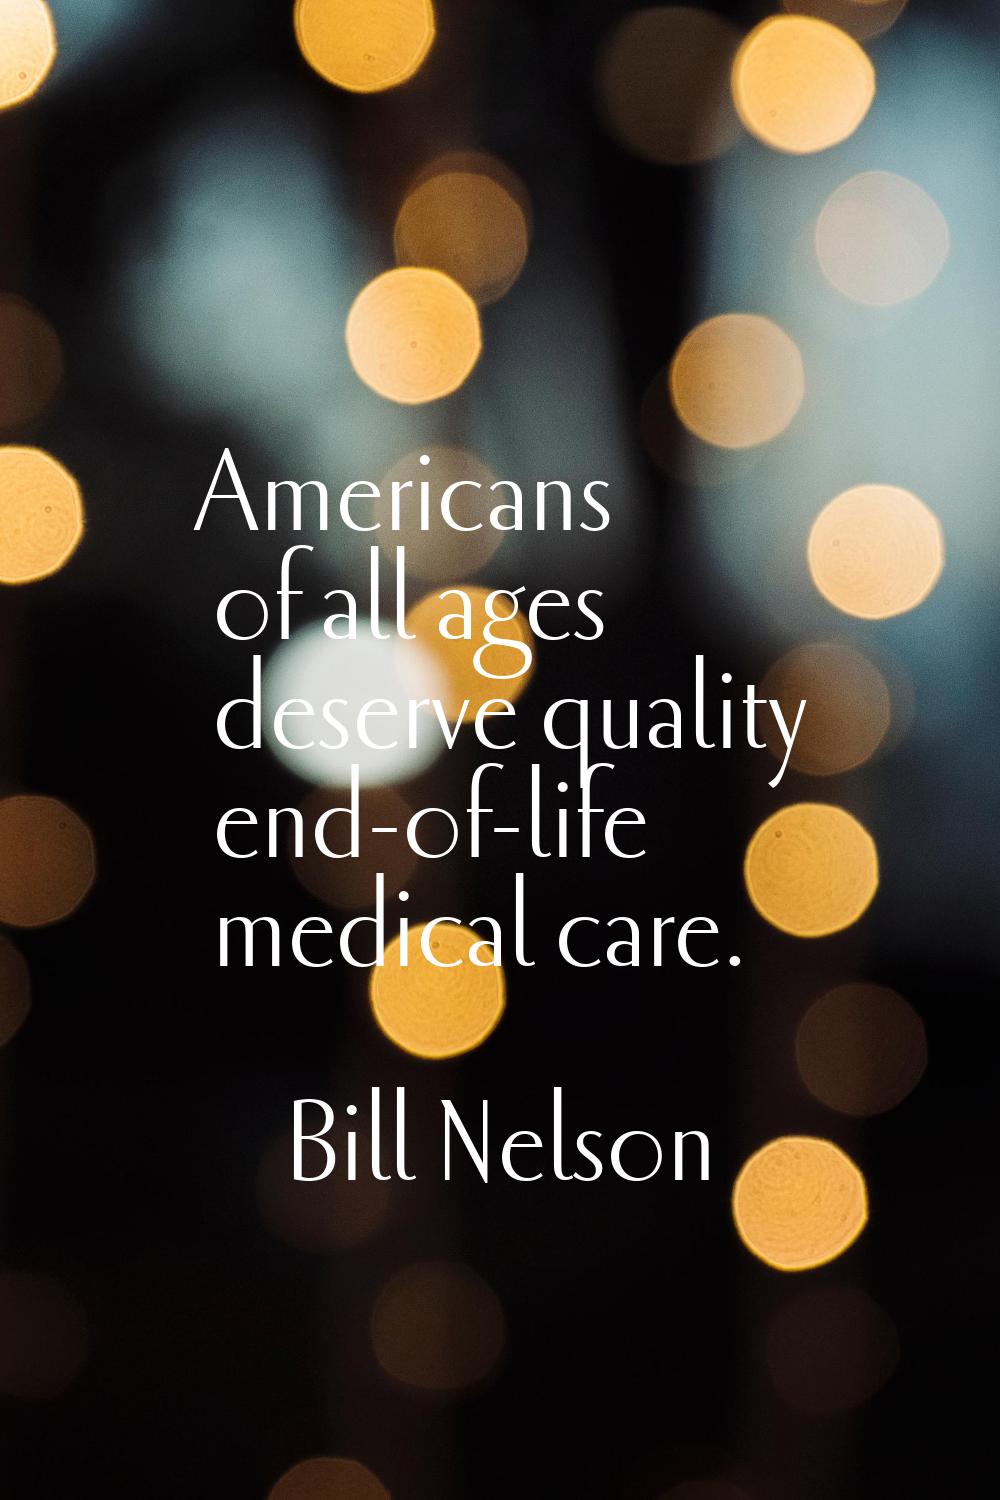 Americans of all ages deserve quality end-of-life medical care.